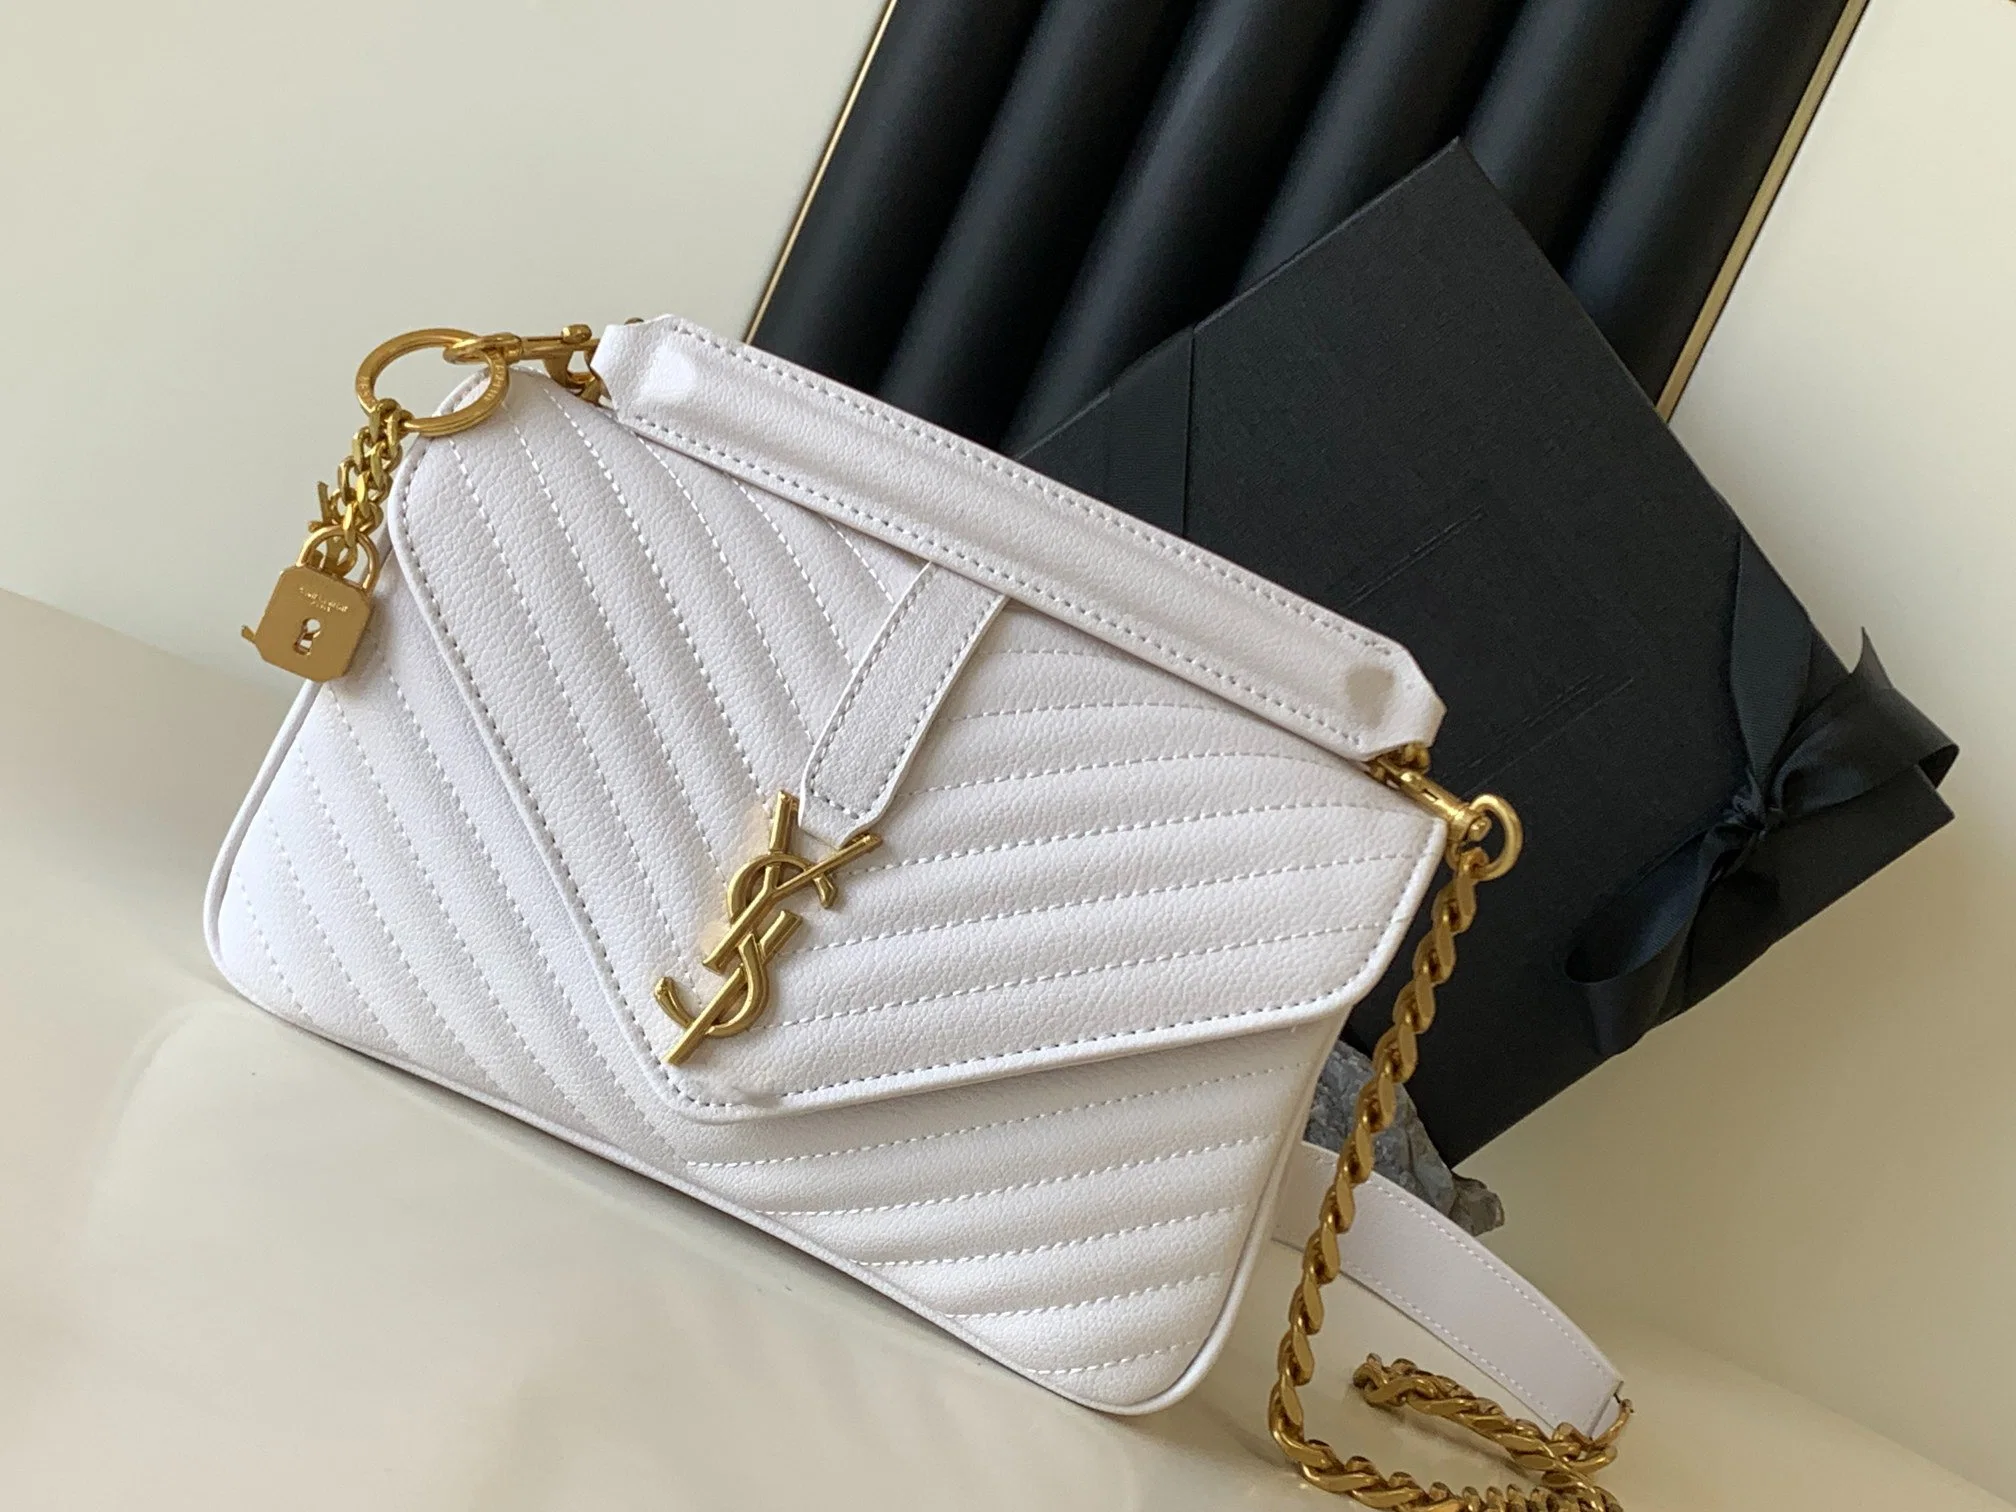 Guangzhou Best Selling New Designer Luxury Replica High Quality Famous Brand Different Size Handbag Wallet Tote Bag Handbags